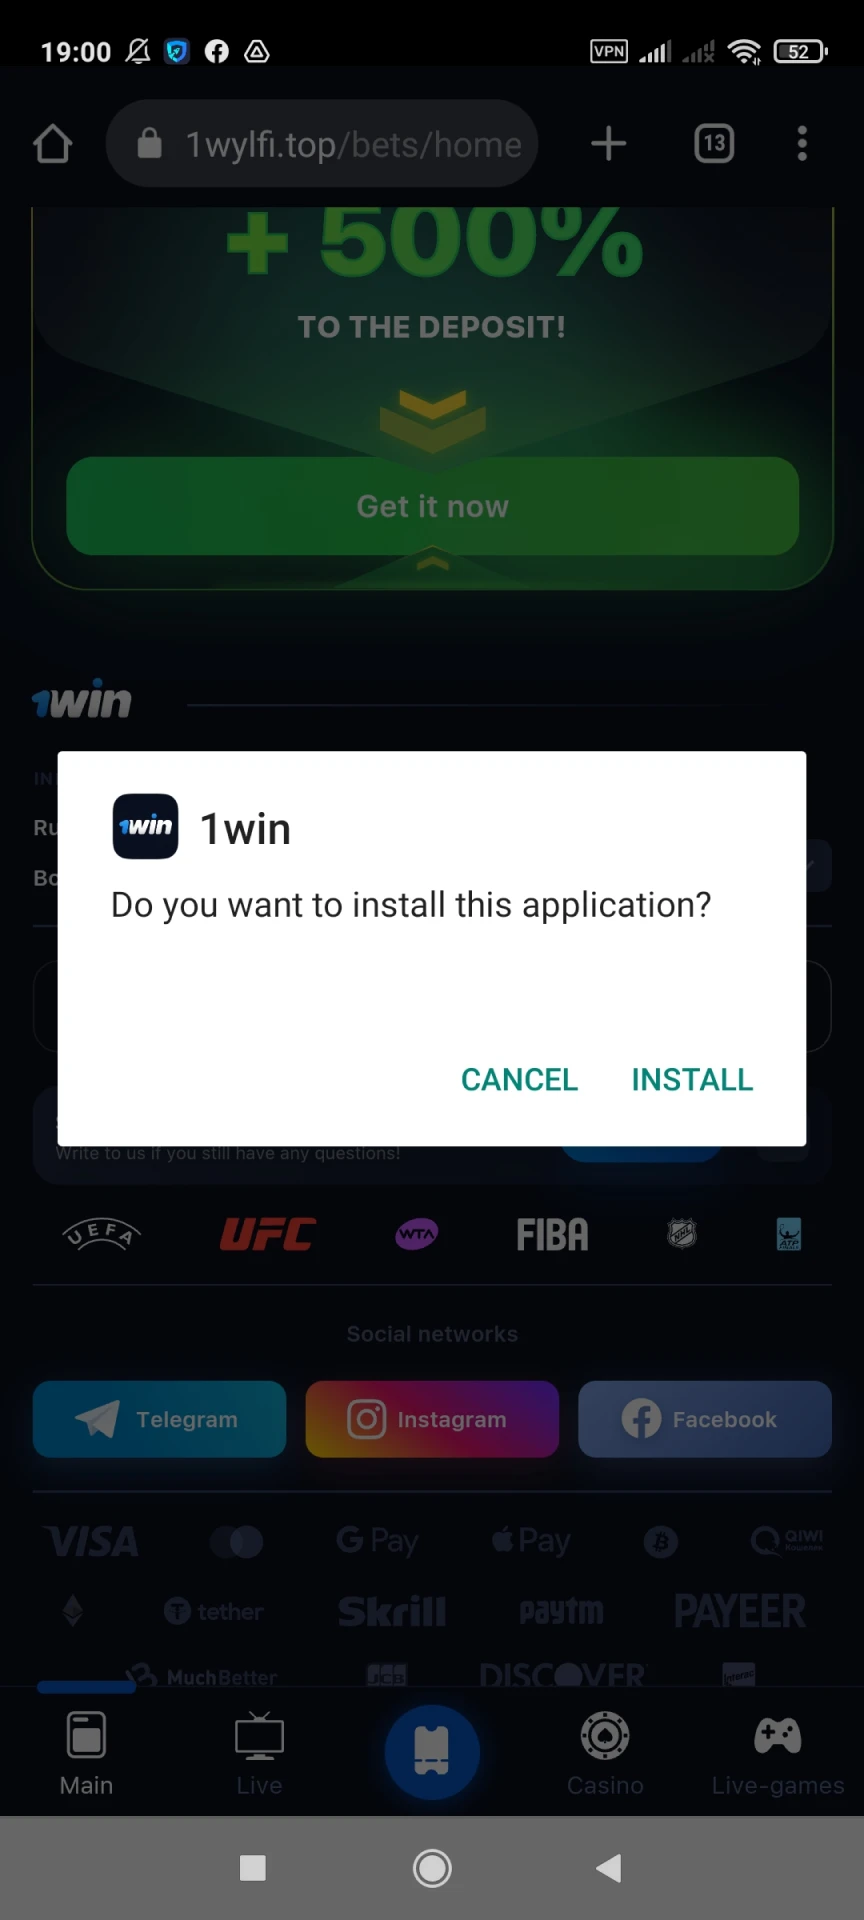 Confirm installation of the 1win app.